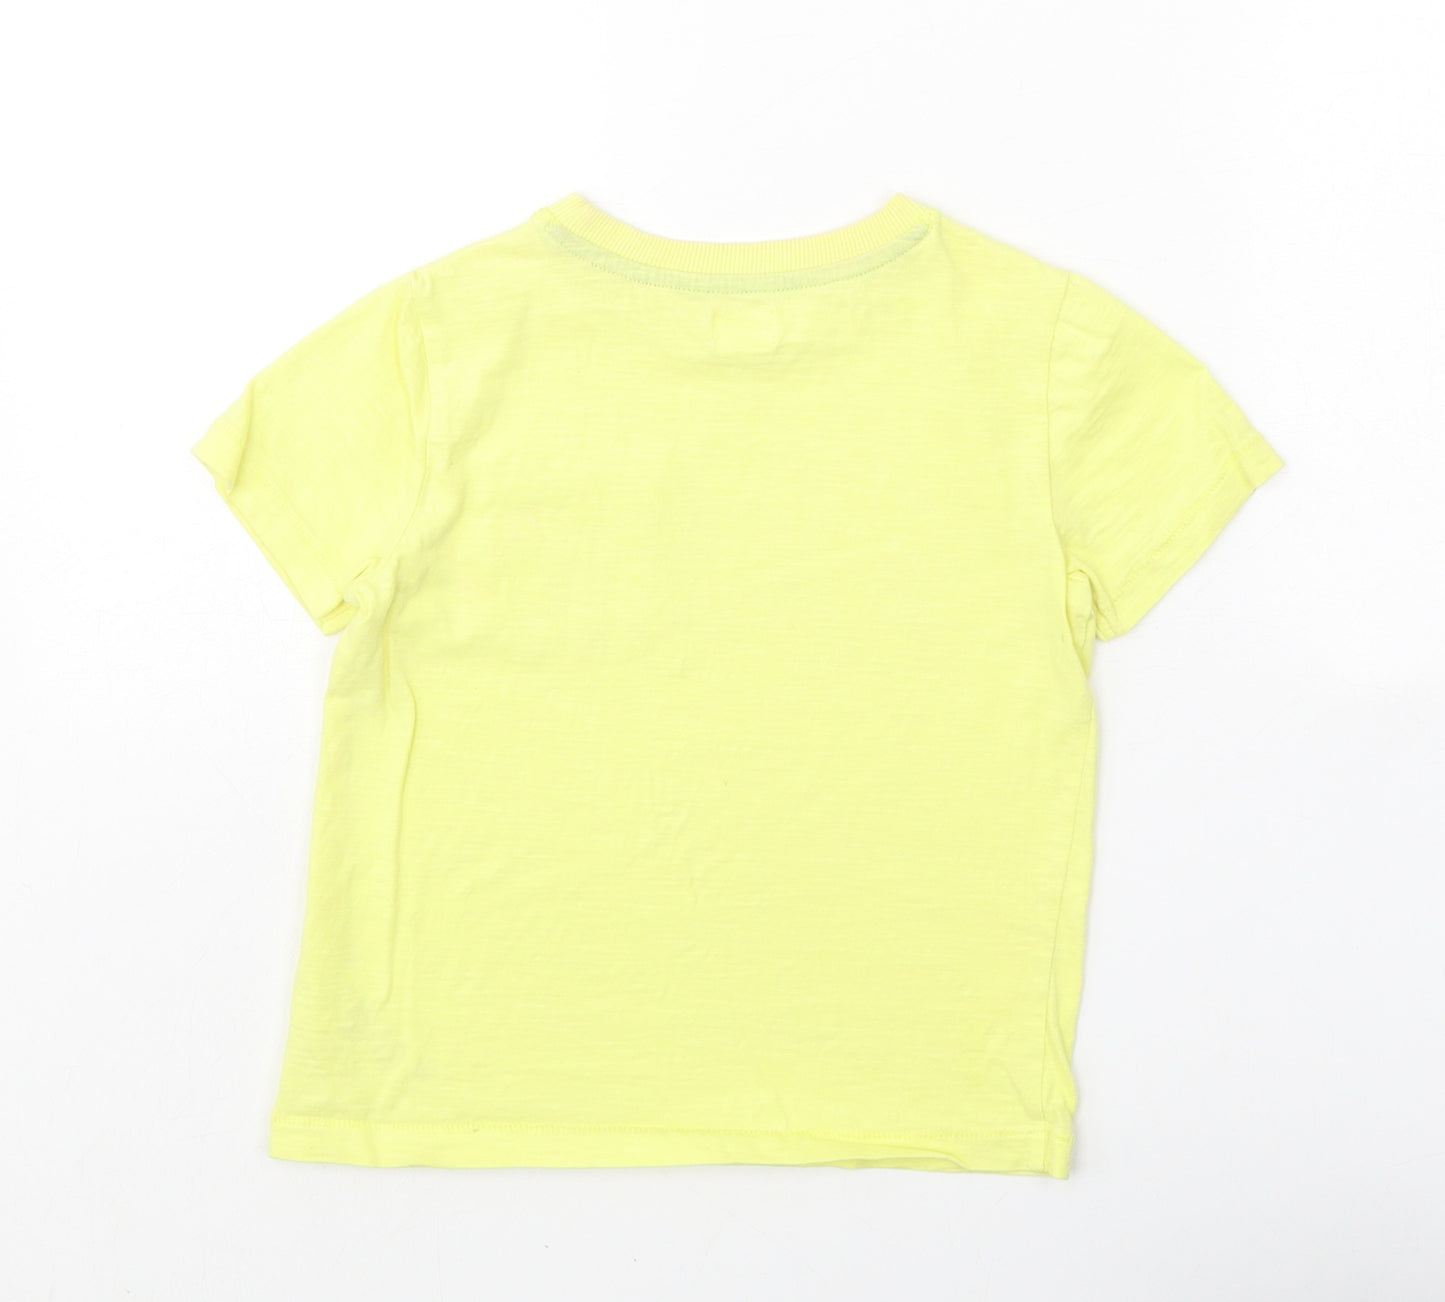 F&F Boys Yellow 100% Cotton Basic T-Shirt Size 4-5 Years Round Neck Pullover